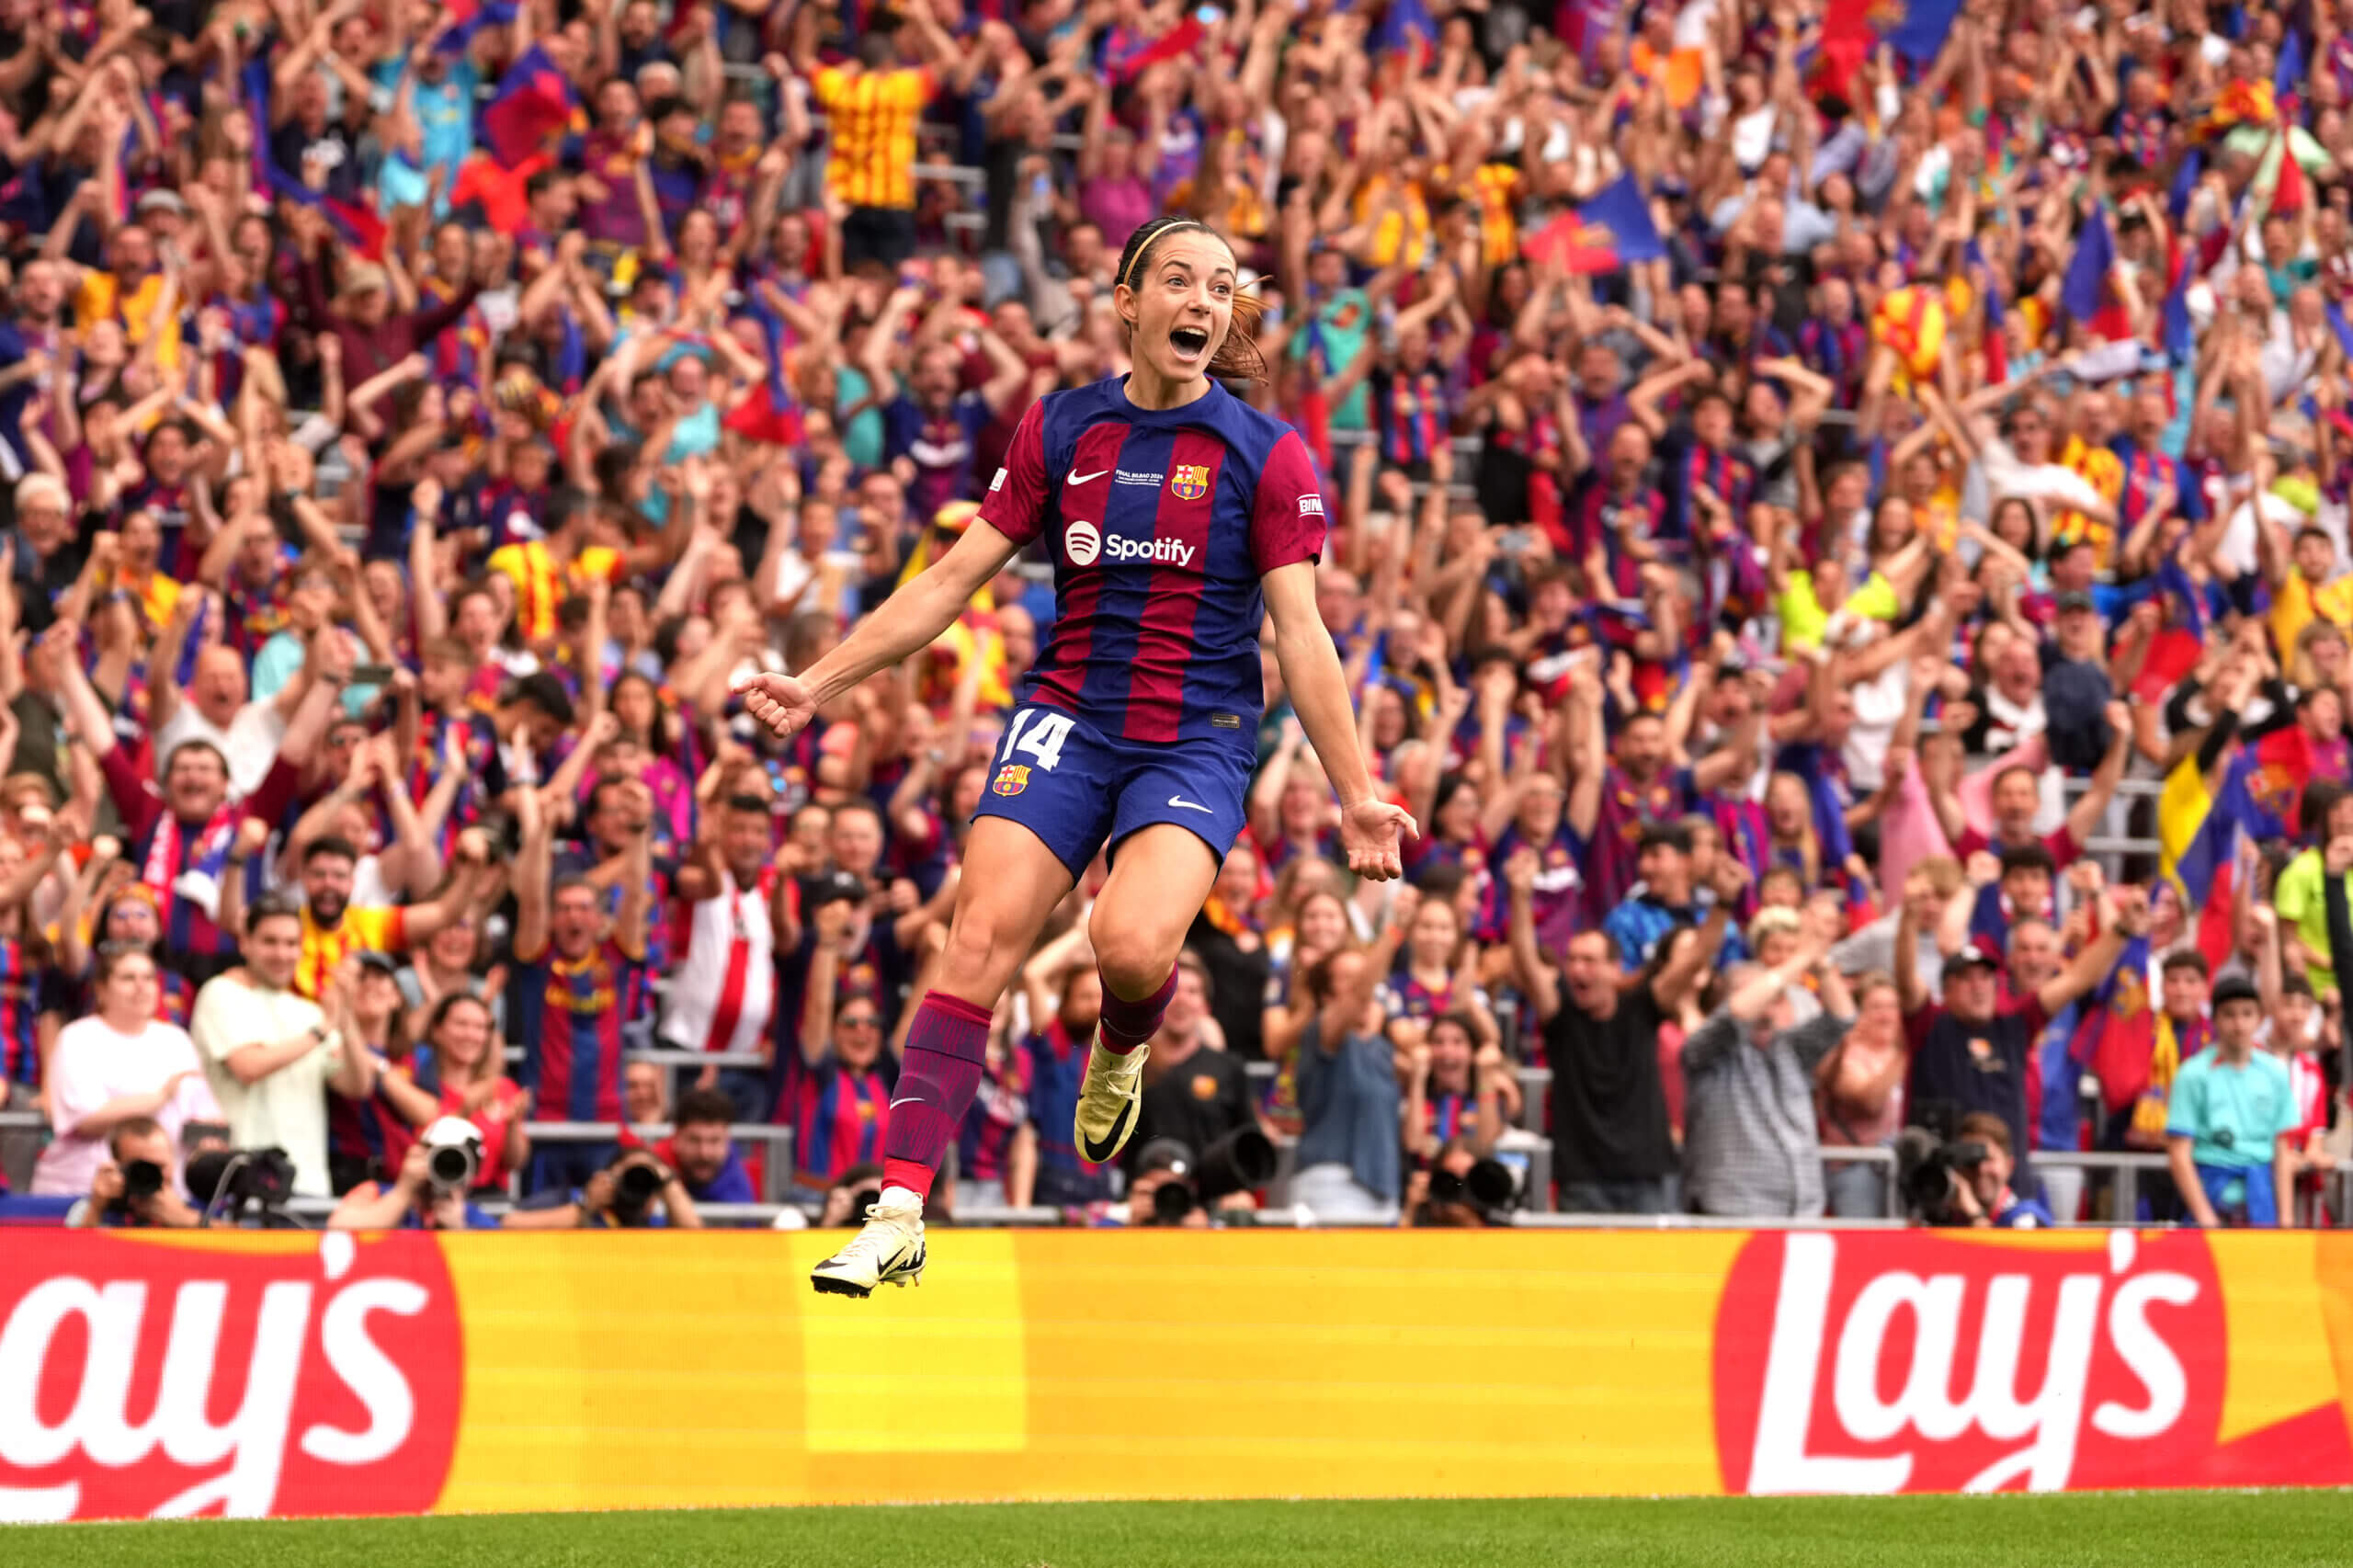 The Briefing: Barcelona 2 Lyon 0: Bonmati helps retain European title. Is this a changing of the guard?